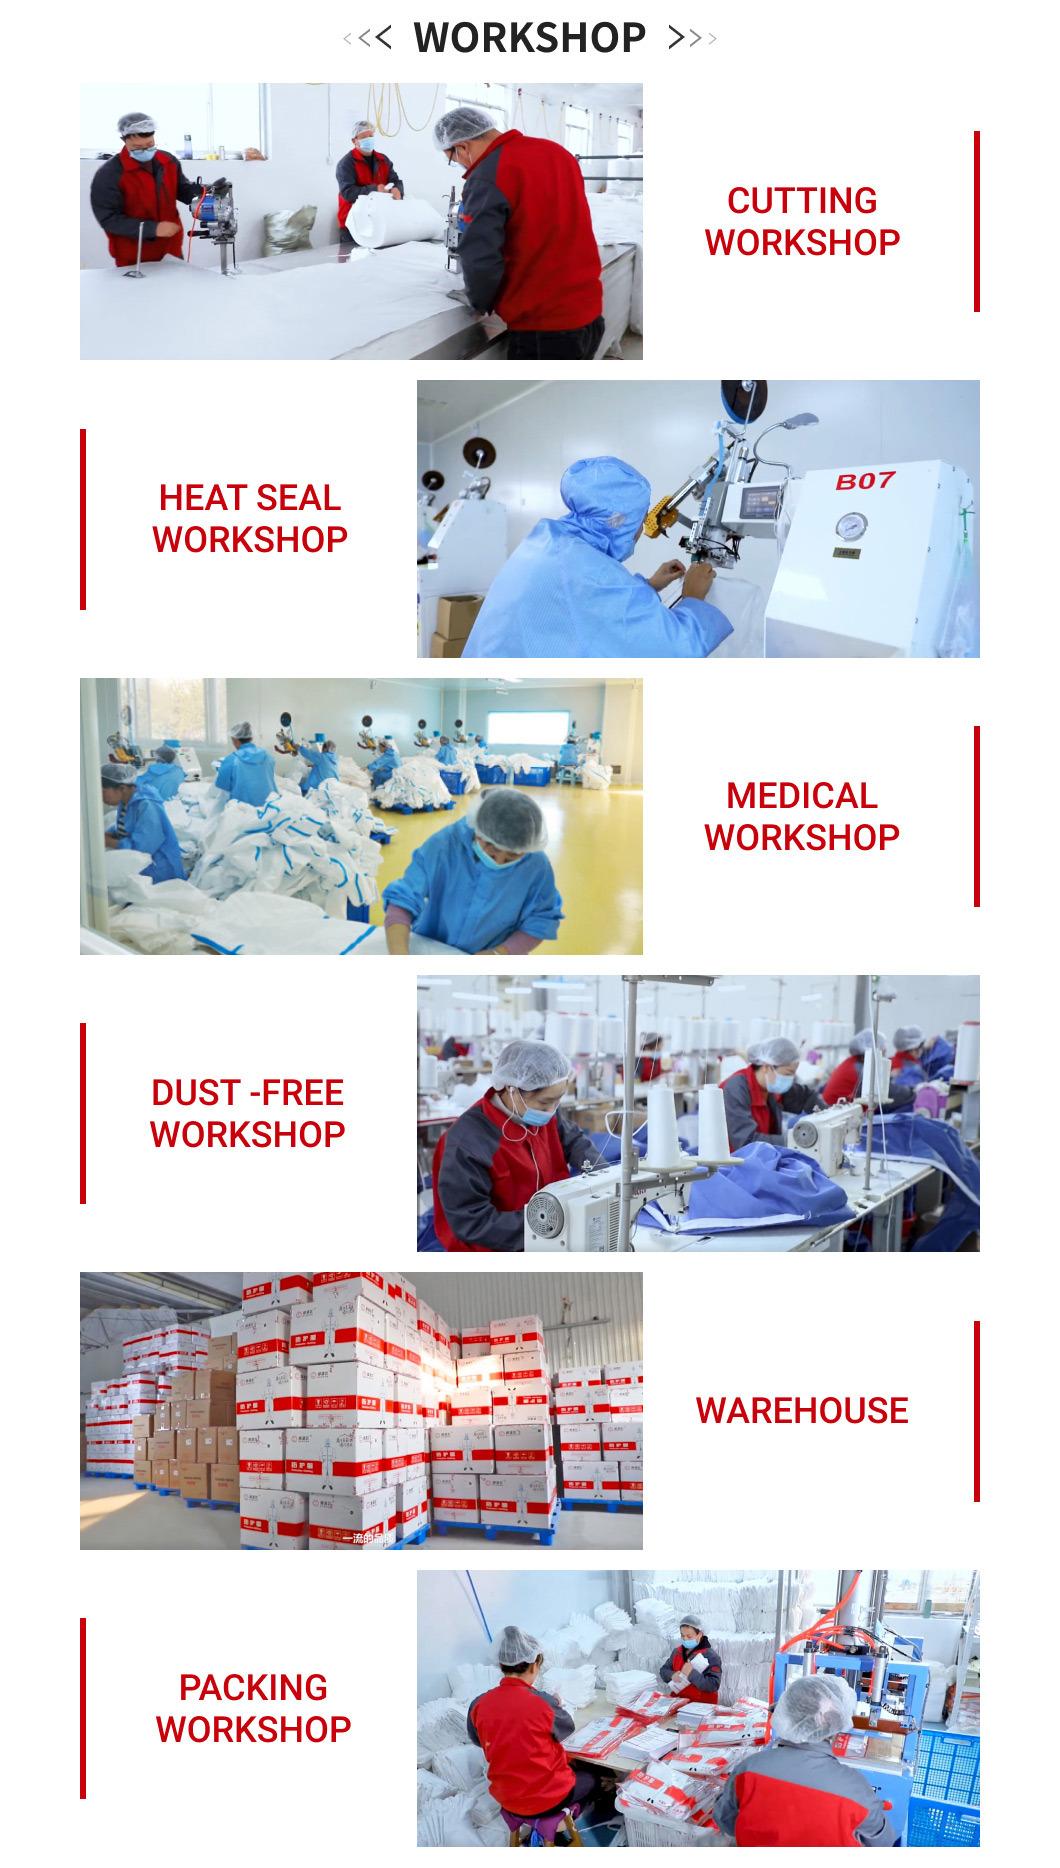 Special Desinsurgical/Medical/Waterproof/Plastic/PE/Working/Safety/Clothing/ Disposable PP Protective Coverall for Hospital/Lab/Food Processing Industry Service